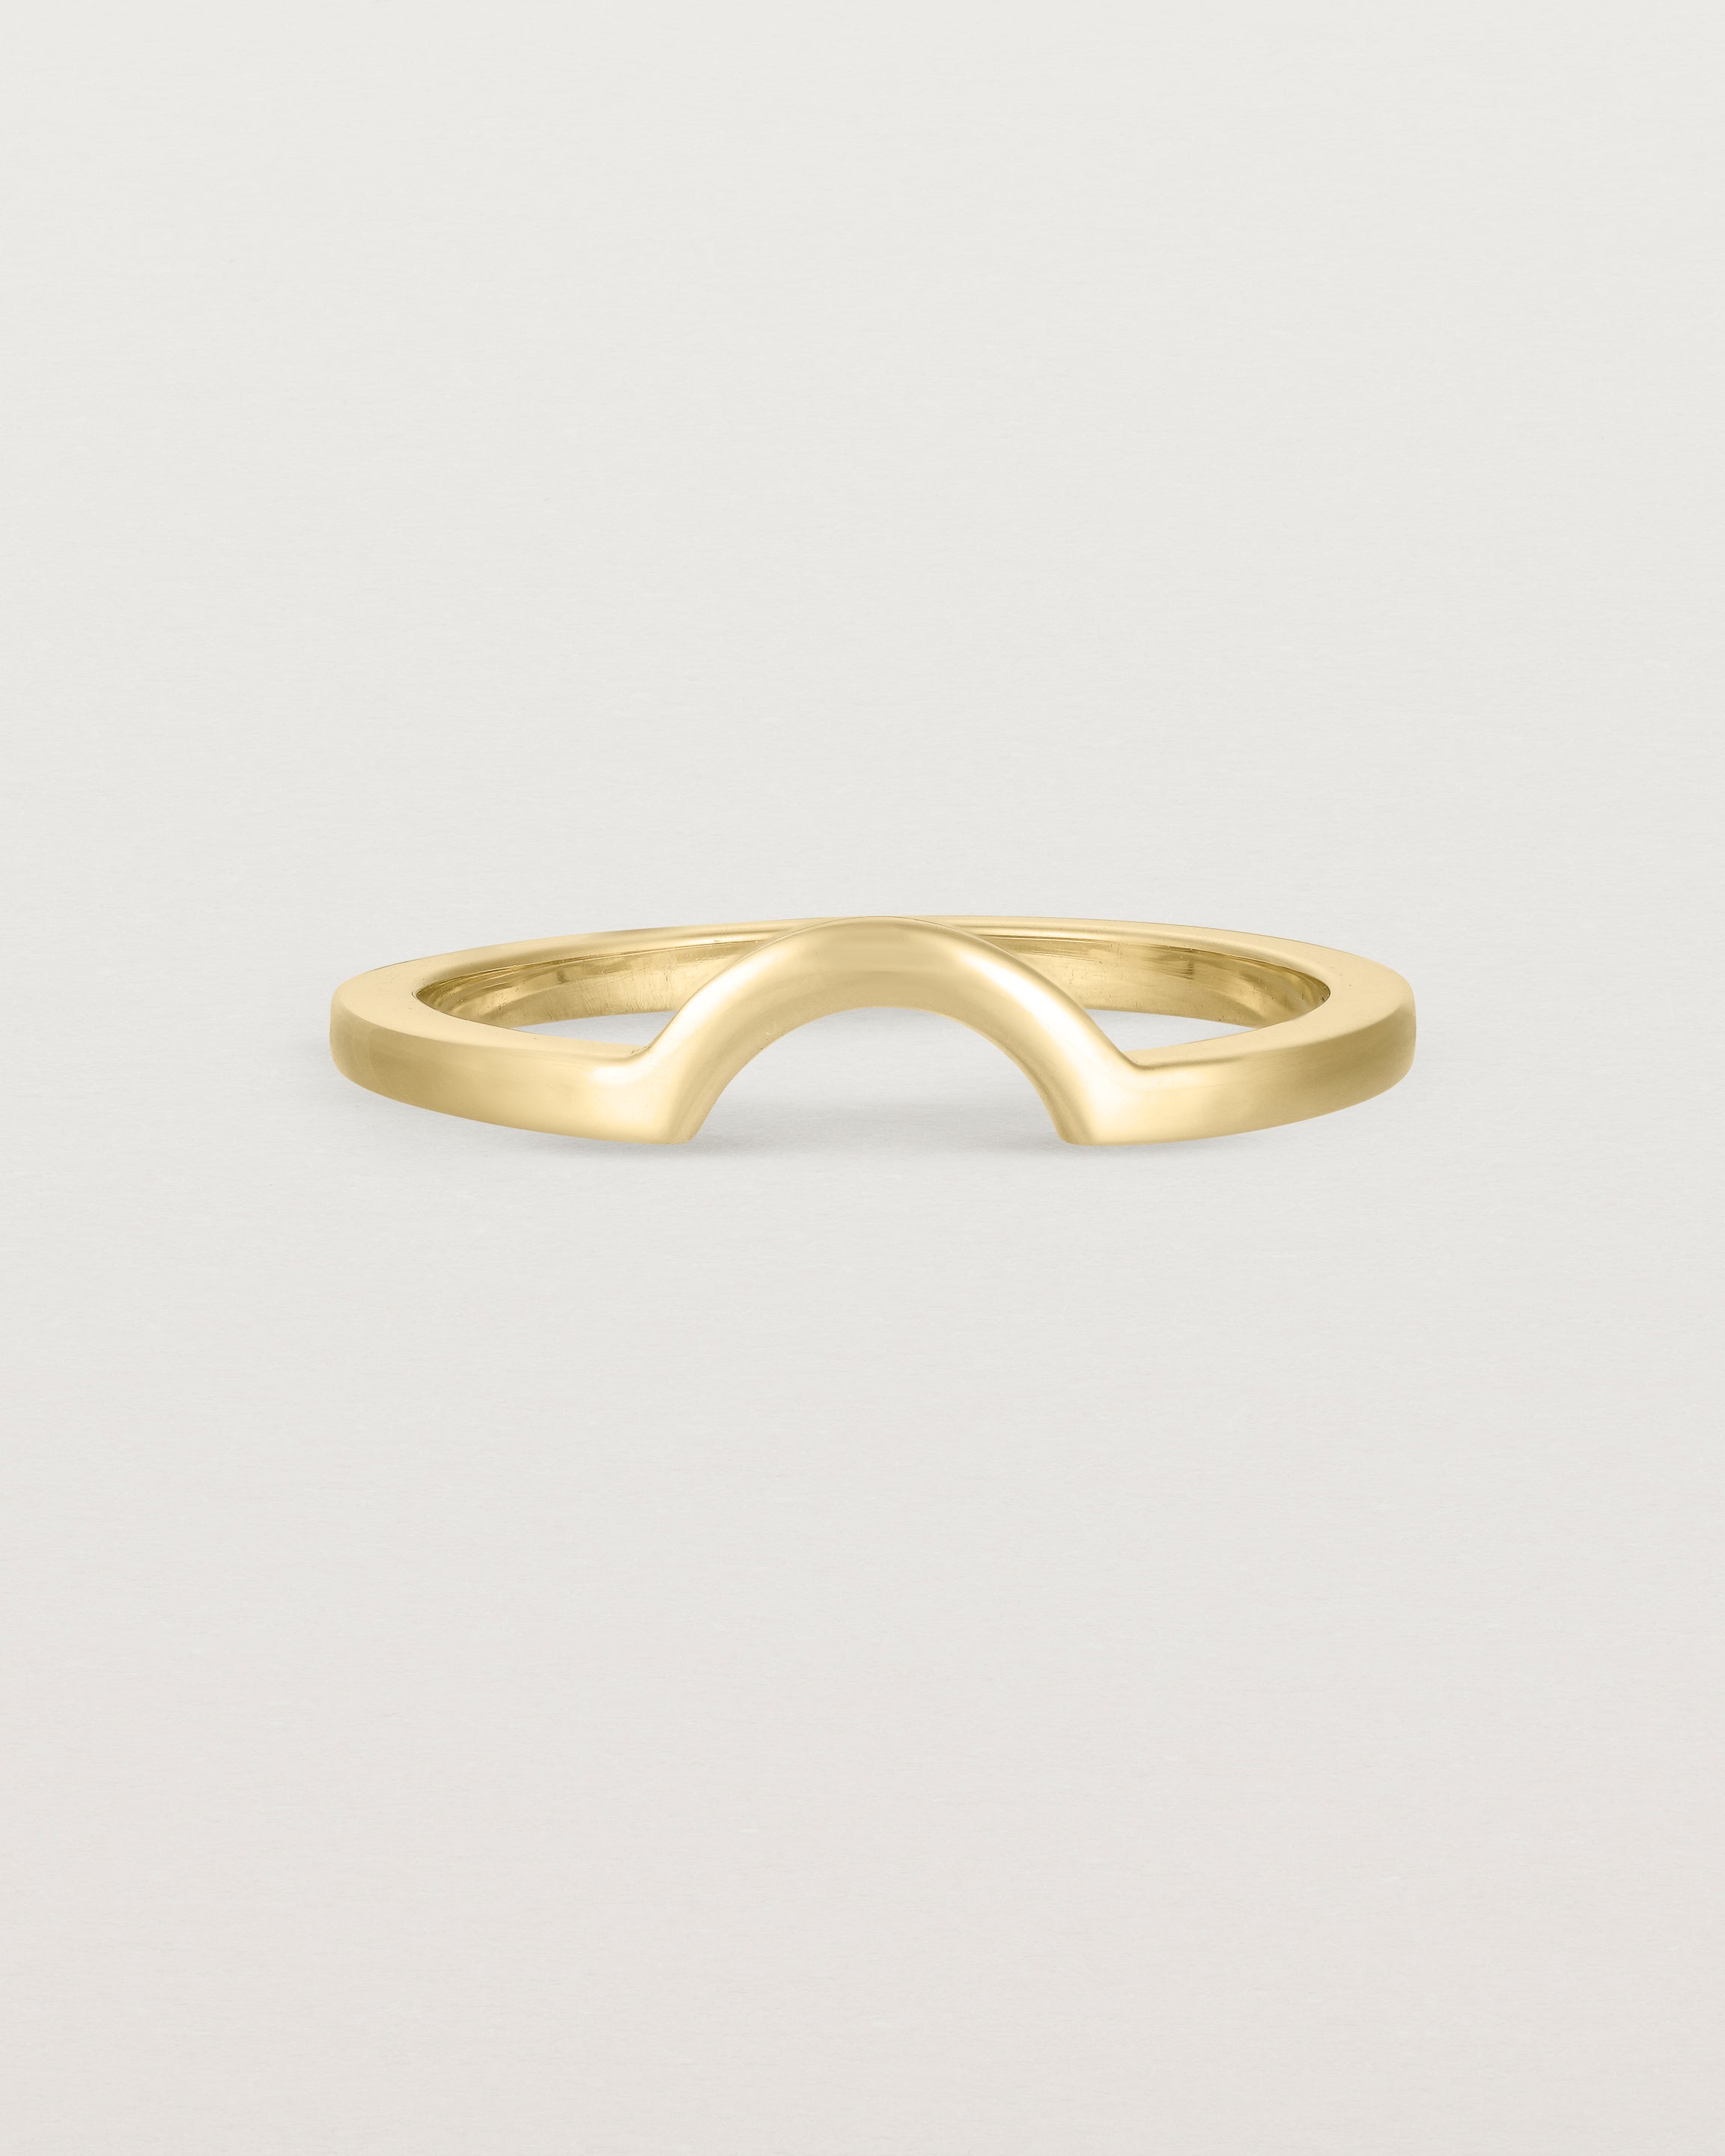 A classic small arc crown ring crafted in yellow gold